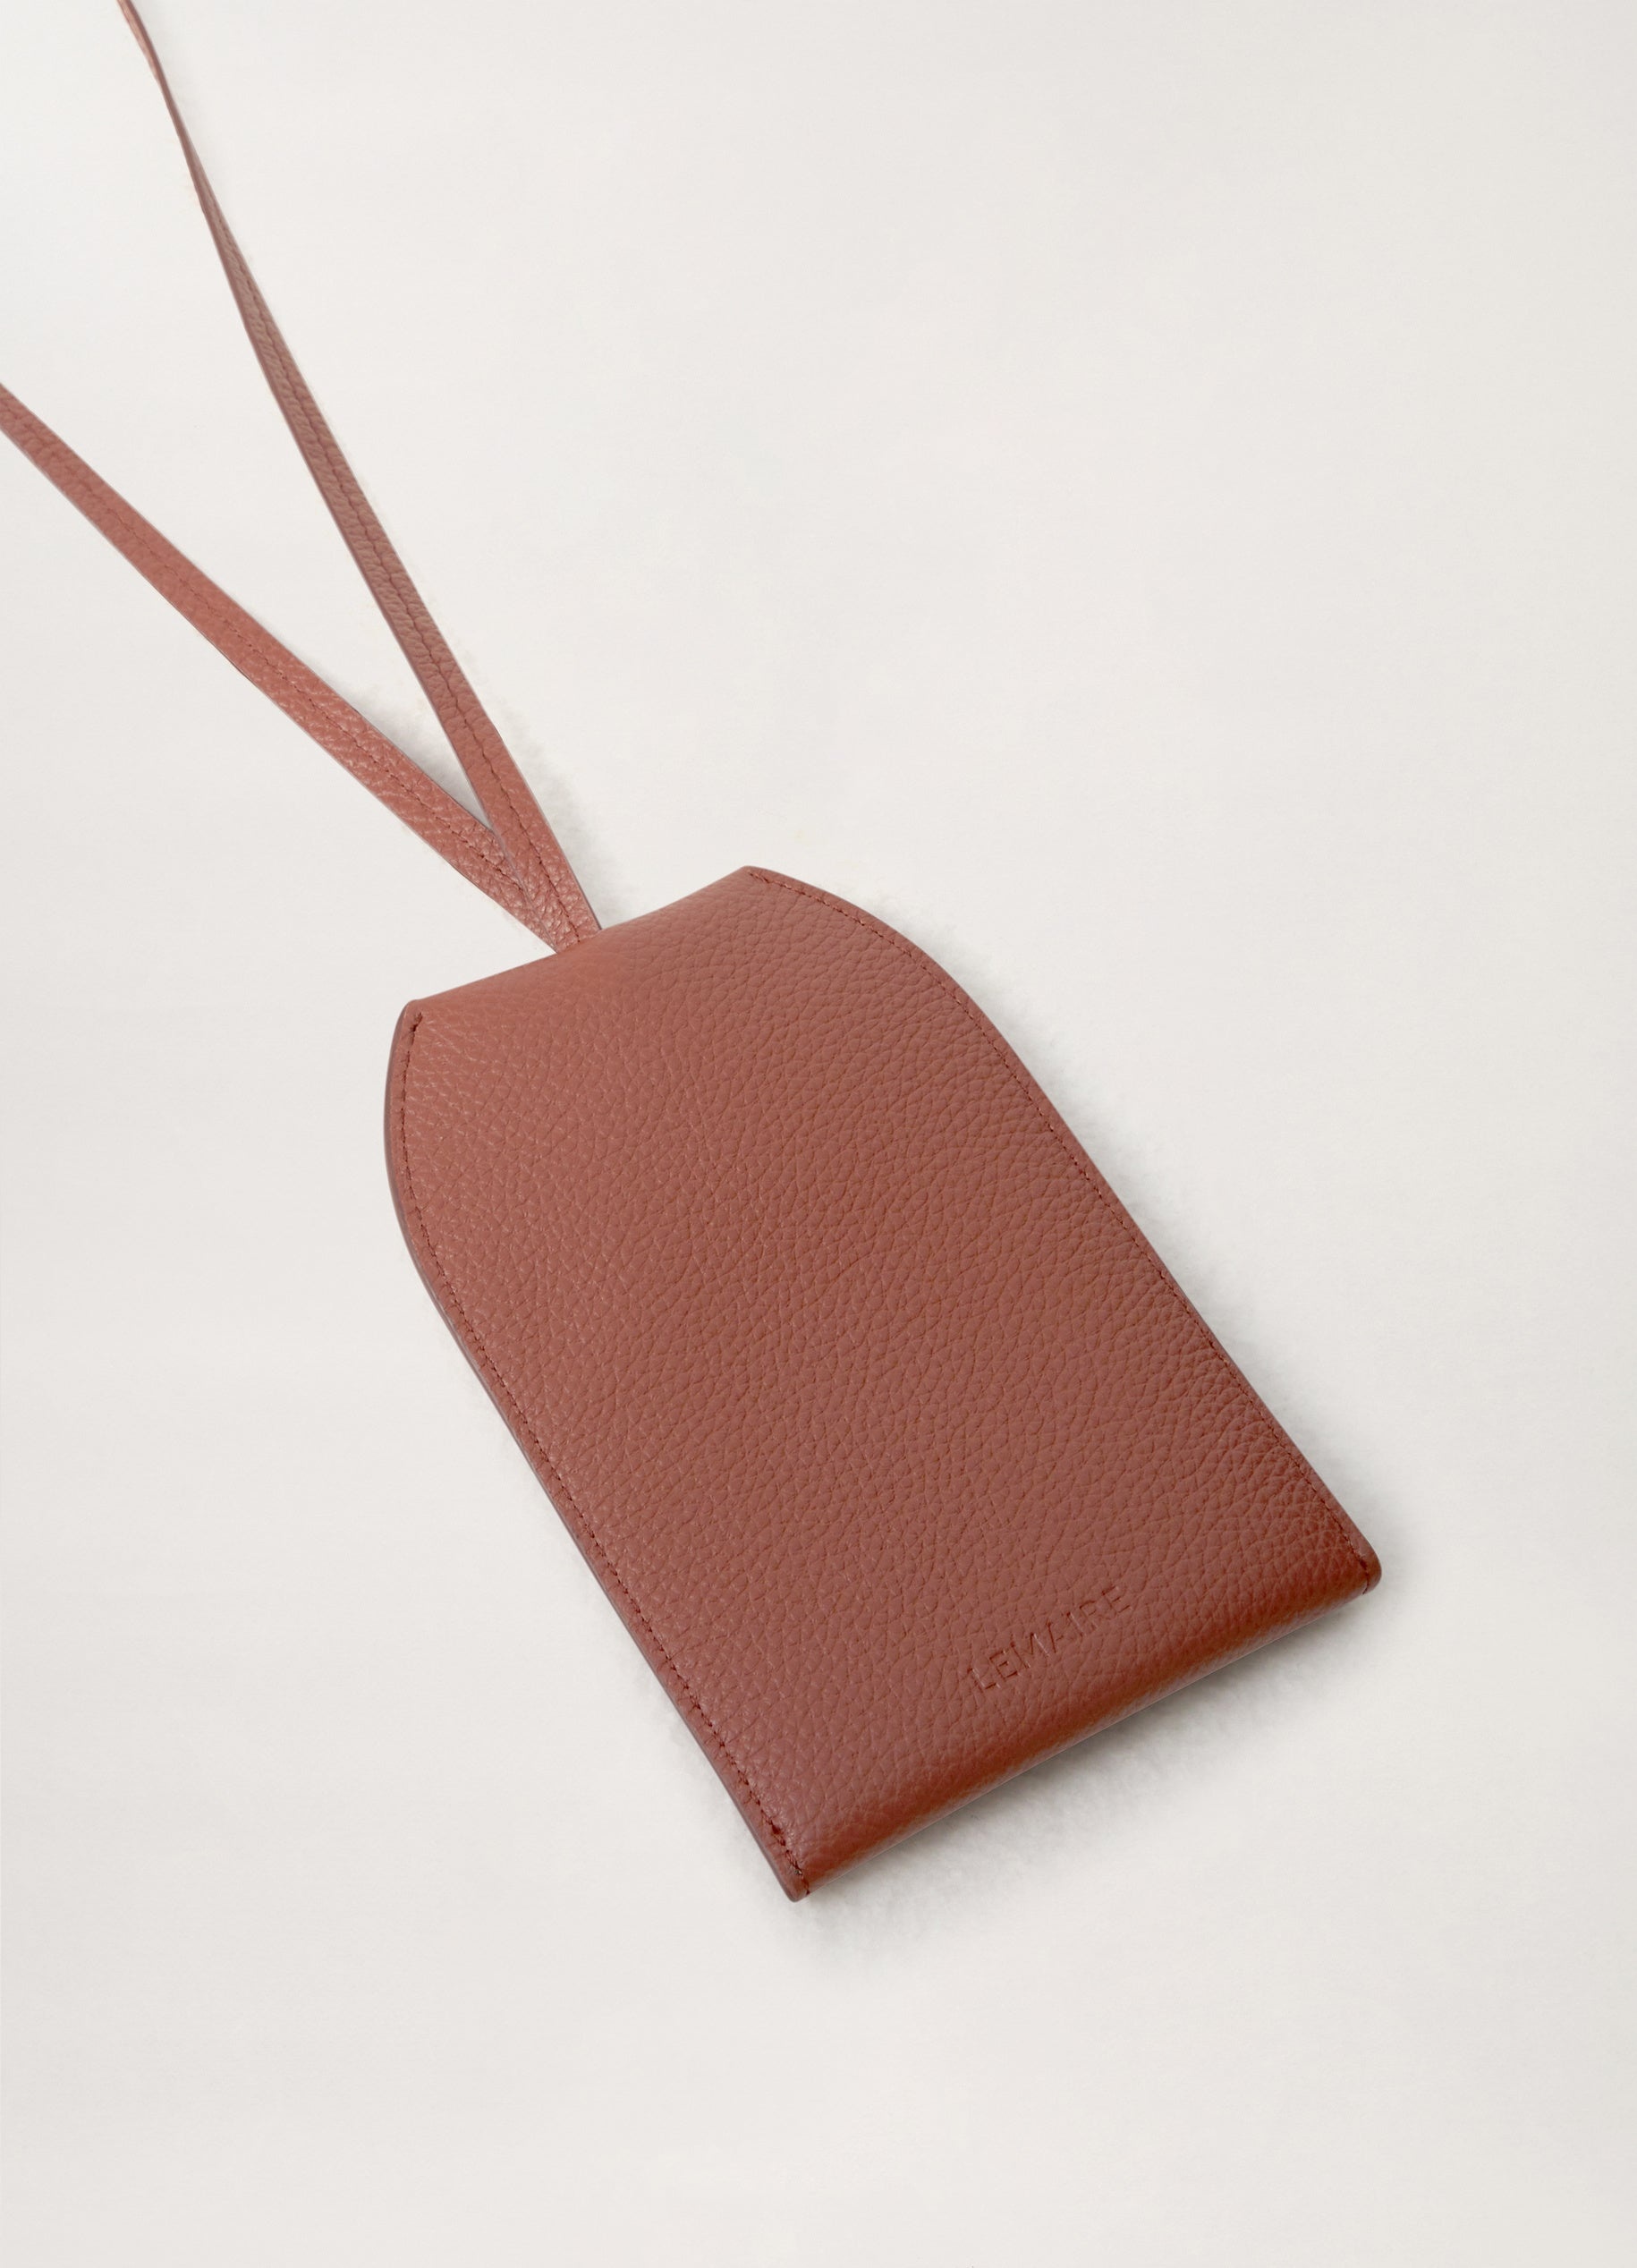 ENVELOPPE KEY RING POUCH
SOFT GRAINED LEATHER - 3